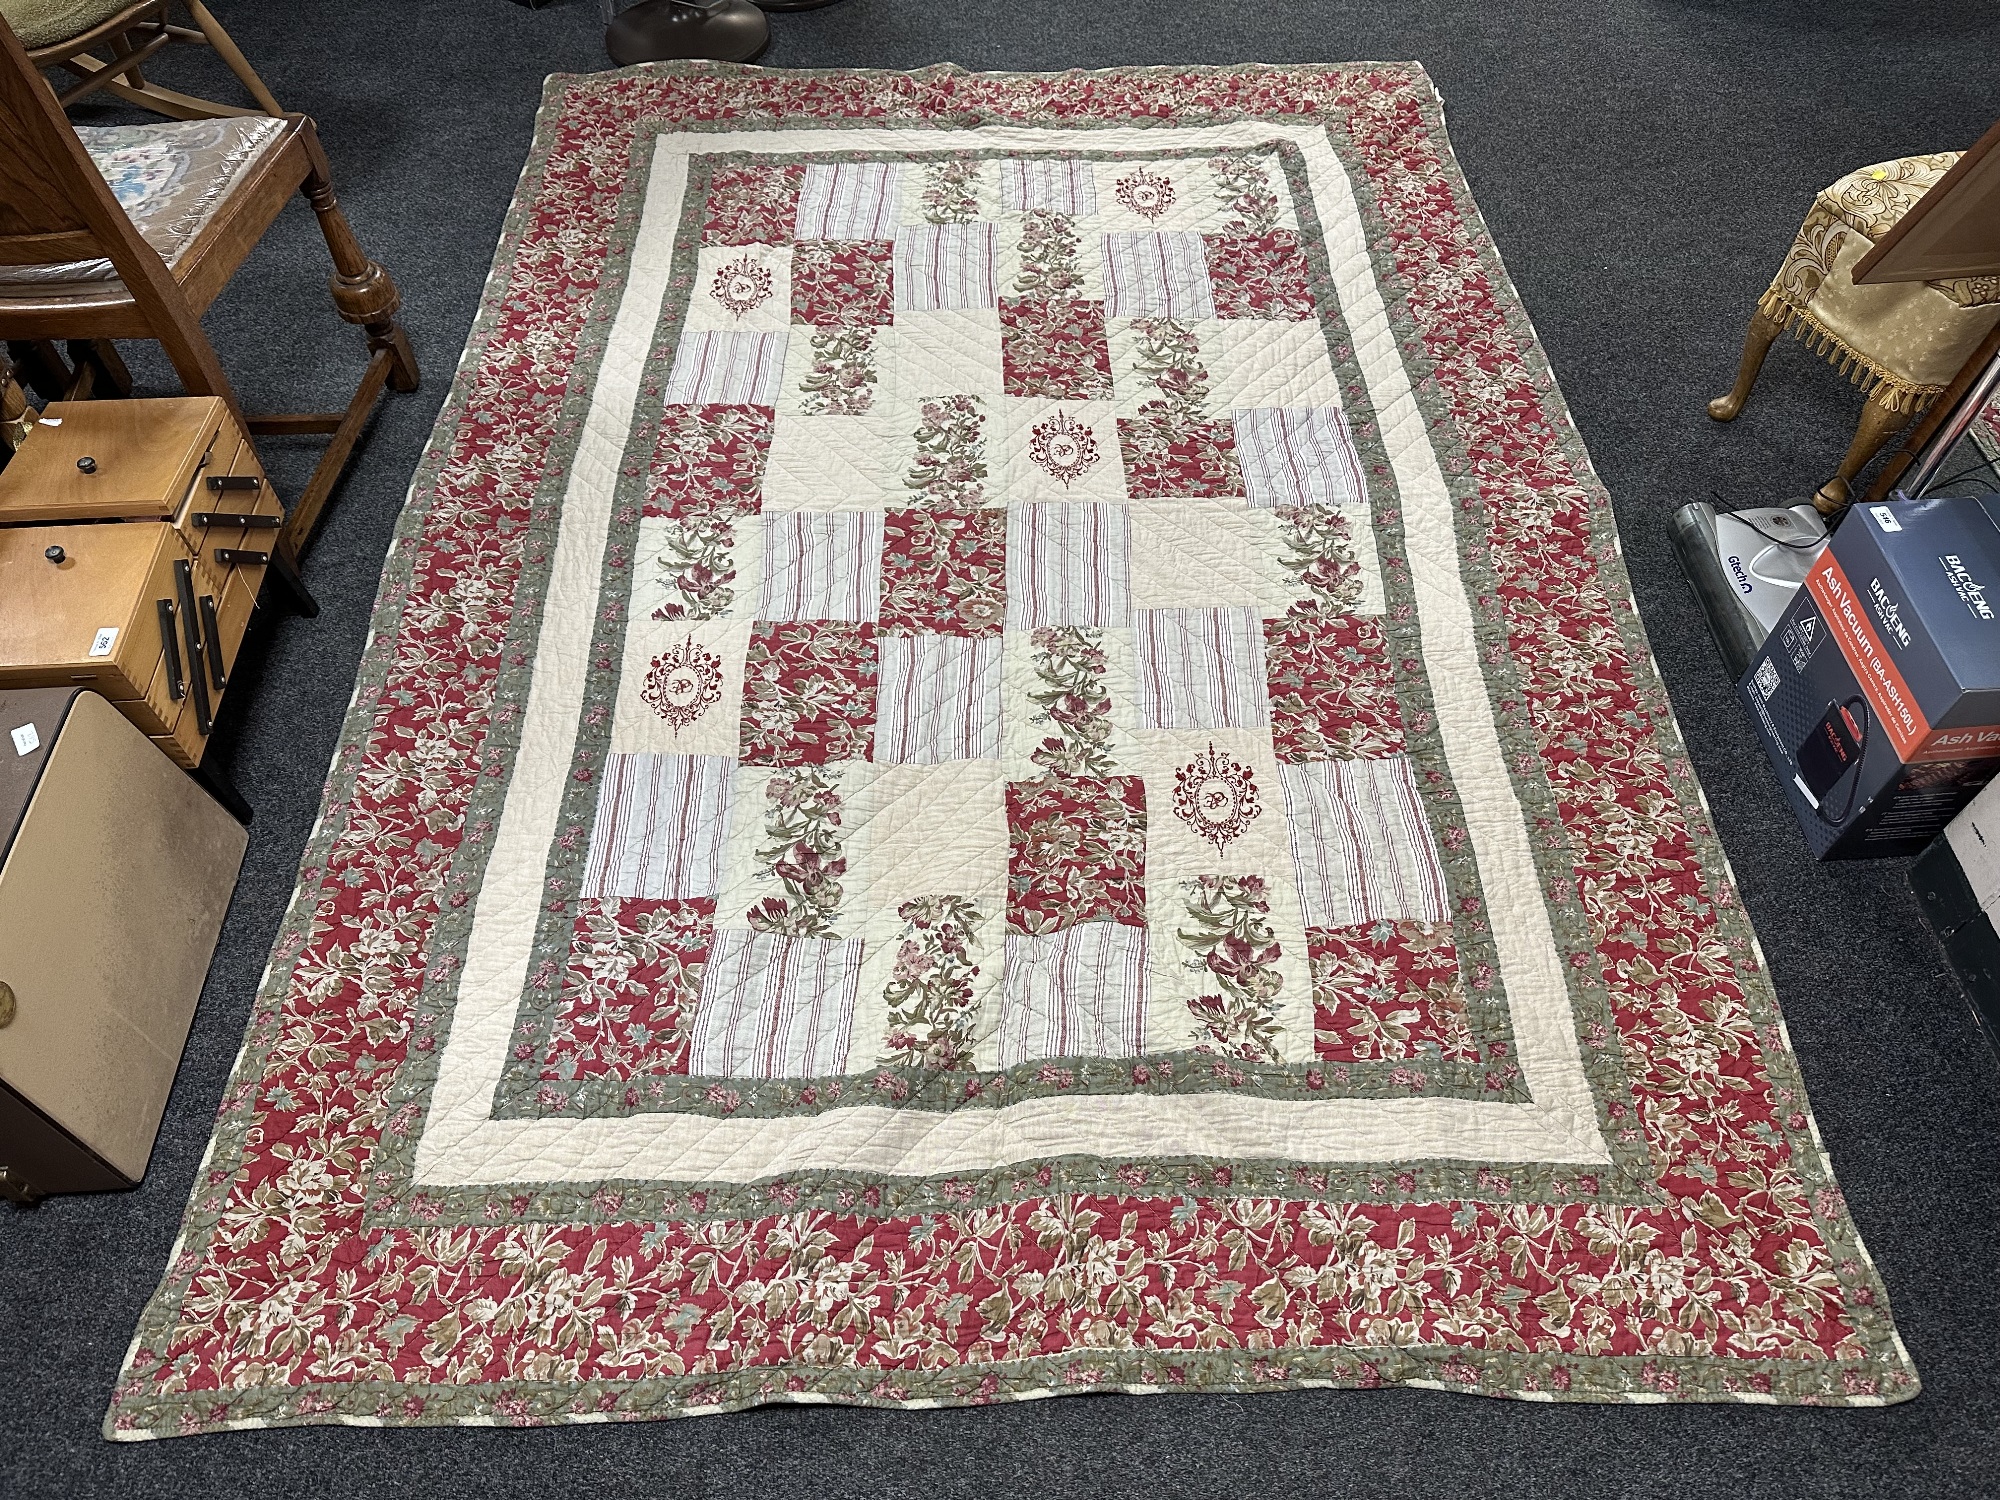 Two stitched patchwork quilts; one red and green labeled Clare & Eef measuring 246cm by 177cm, - Image 2 of 5